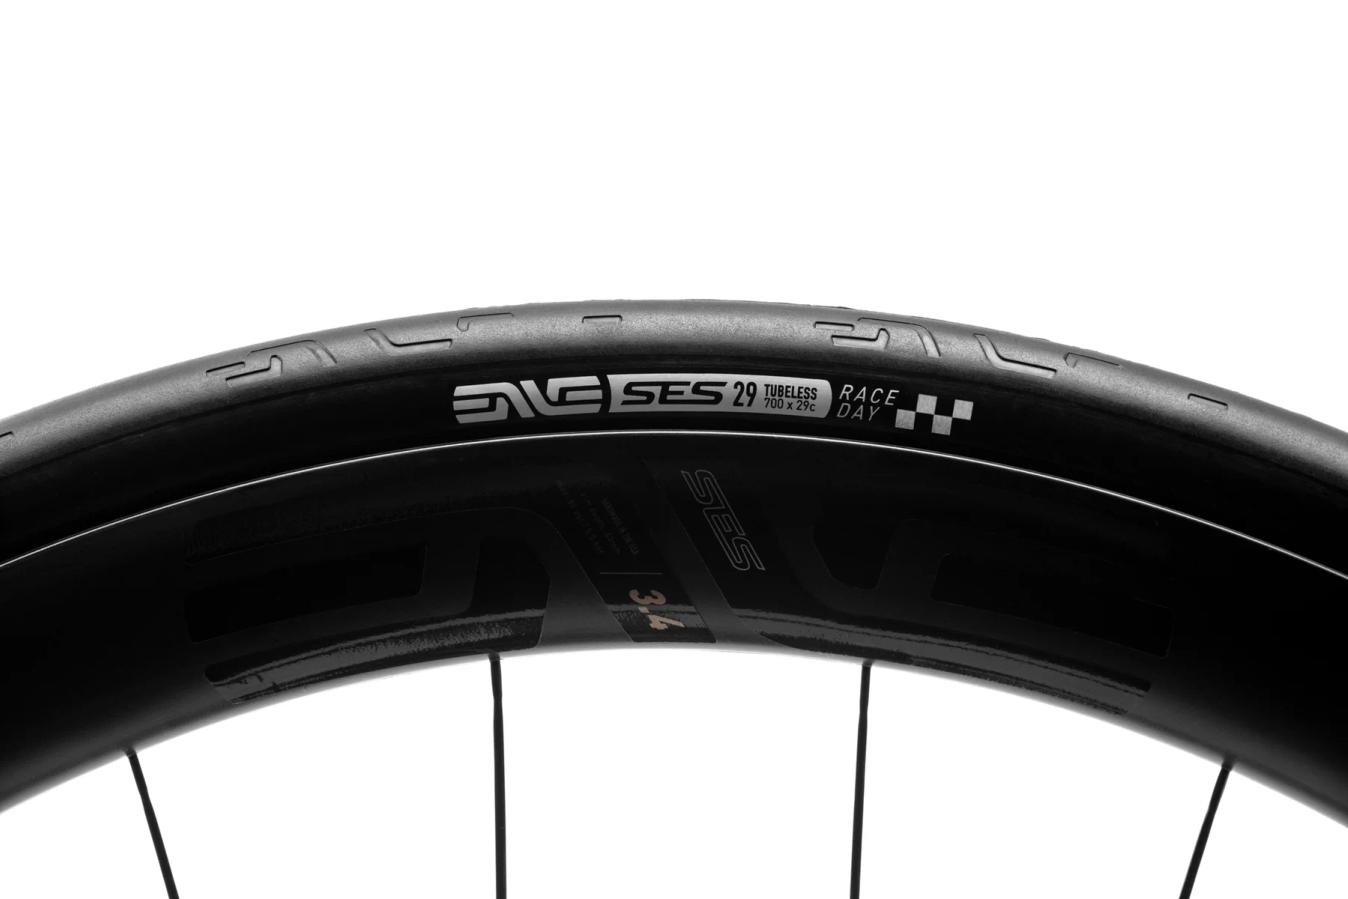 The ENVE SES Raceday is built for perfromance